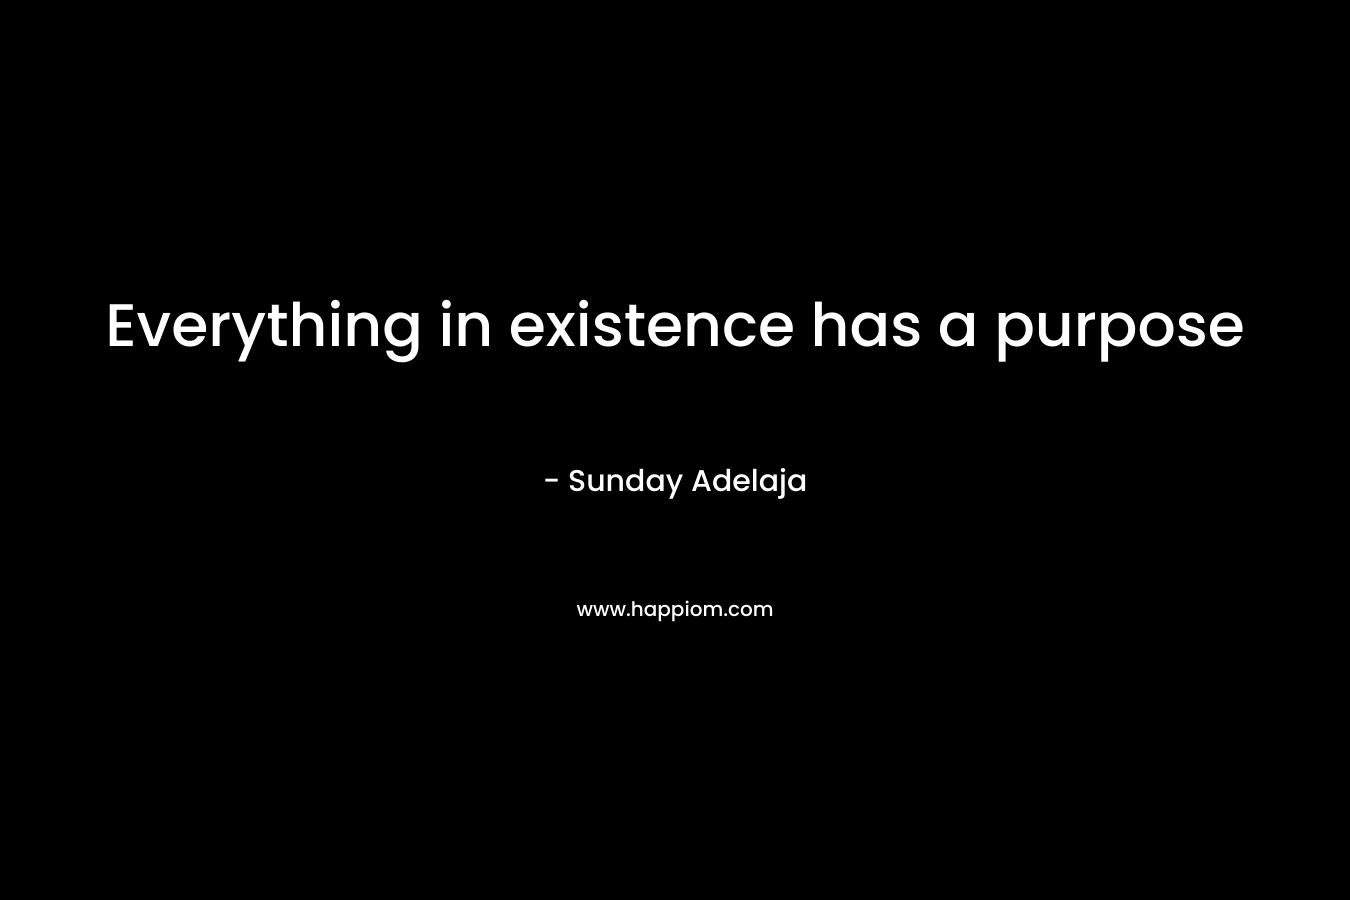 Everything in existence has a purpose